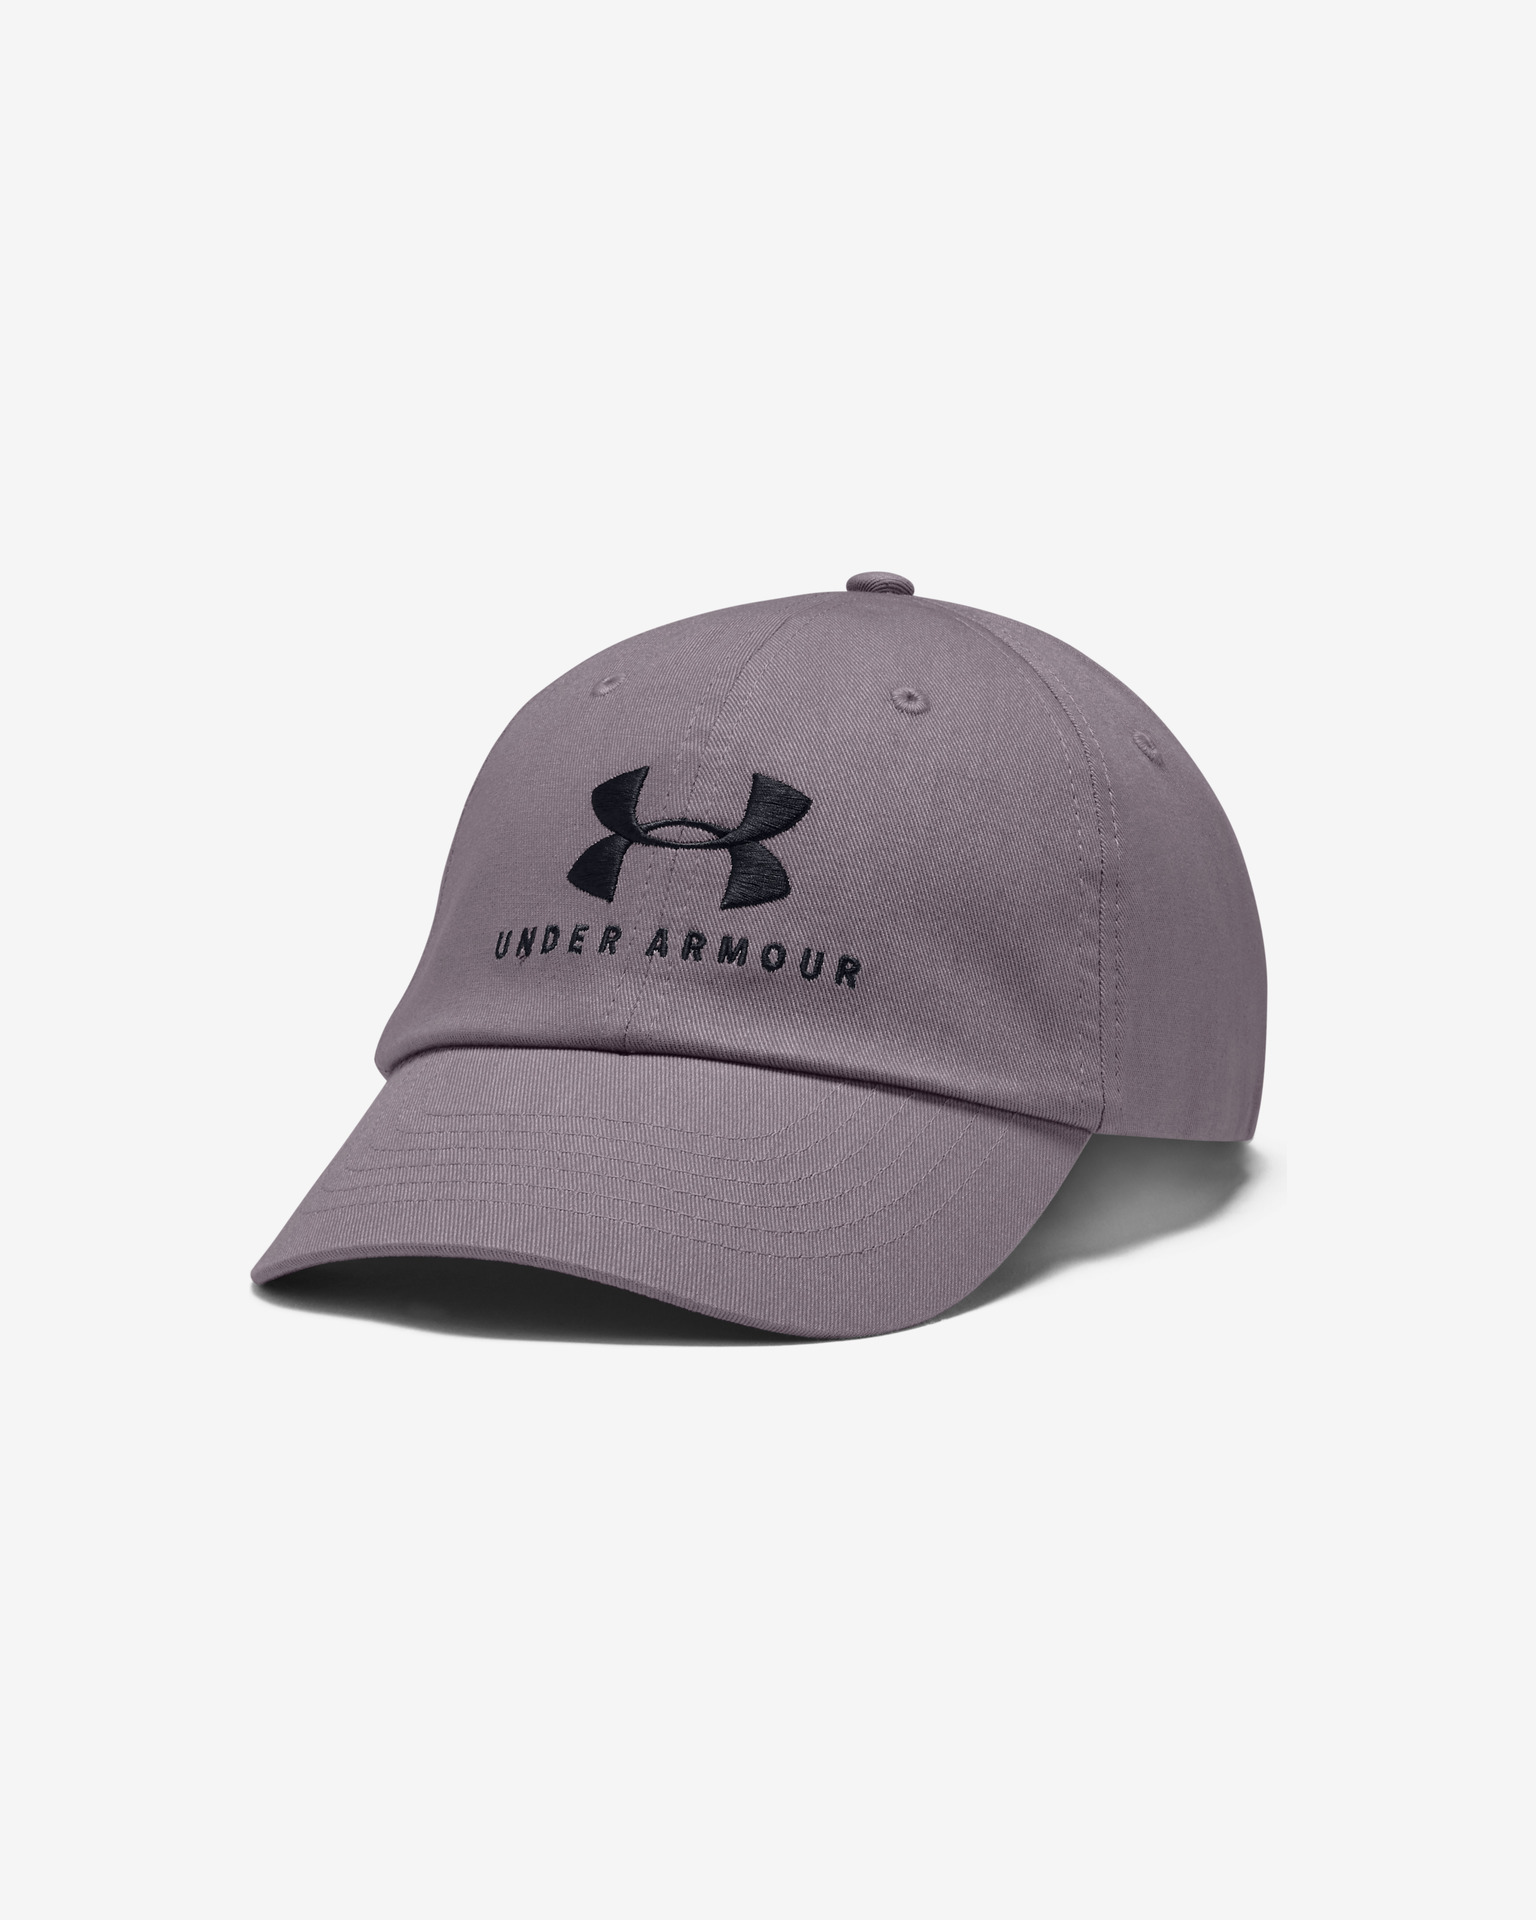 Under Armour - Iso-Chill Driver Visor Cap